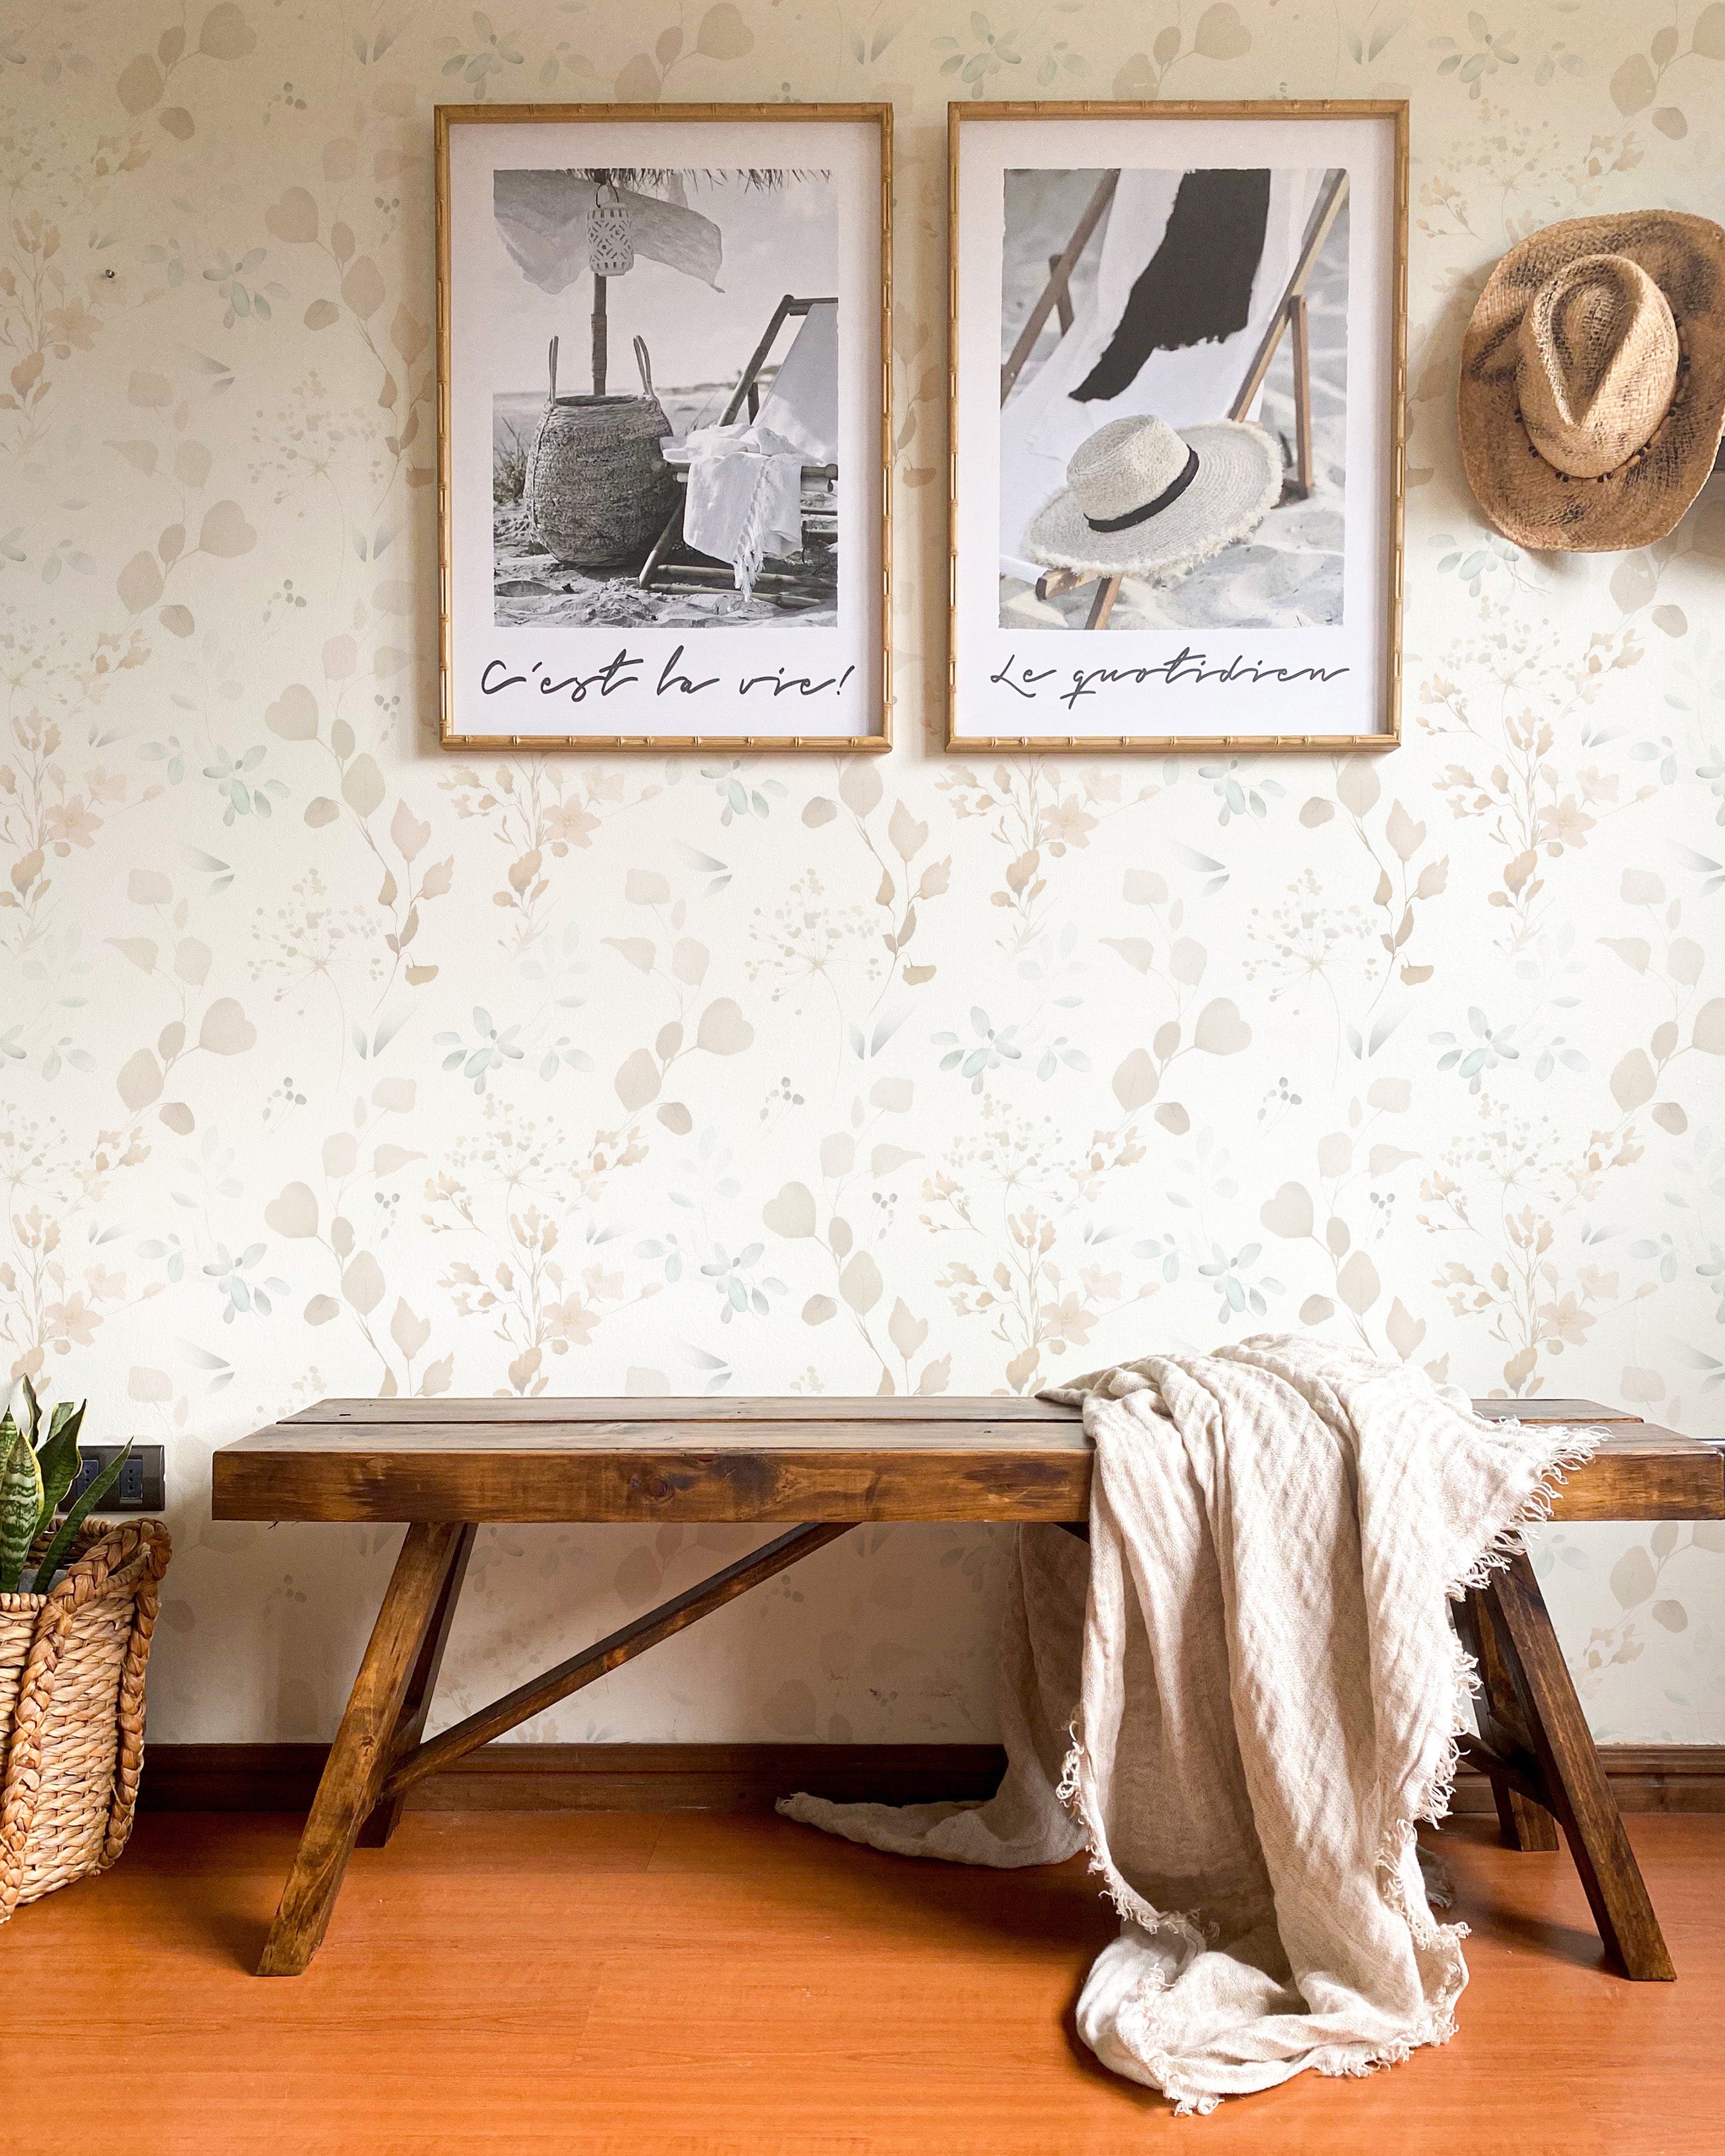 A cozy corner of a room featuring Watercolour Floral & Herb Wallpaper, with pastel botanical patterns creating a tranquil backdrop. The scene includes a rustic wooden bench with a draped cream throw blanket, two framed beach-themed artworks, and a straw hat, suggesting a relaxed, coastal-inspired interior.